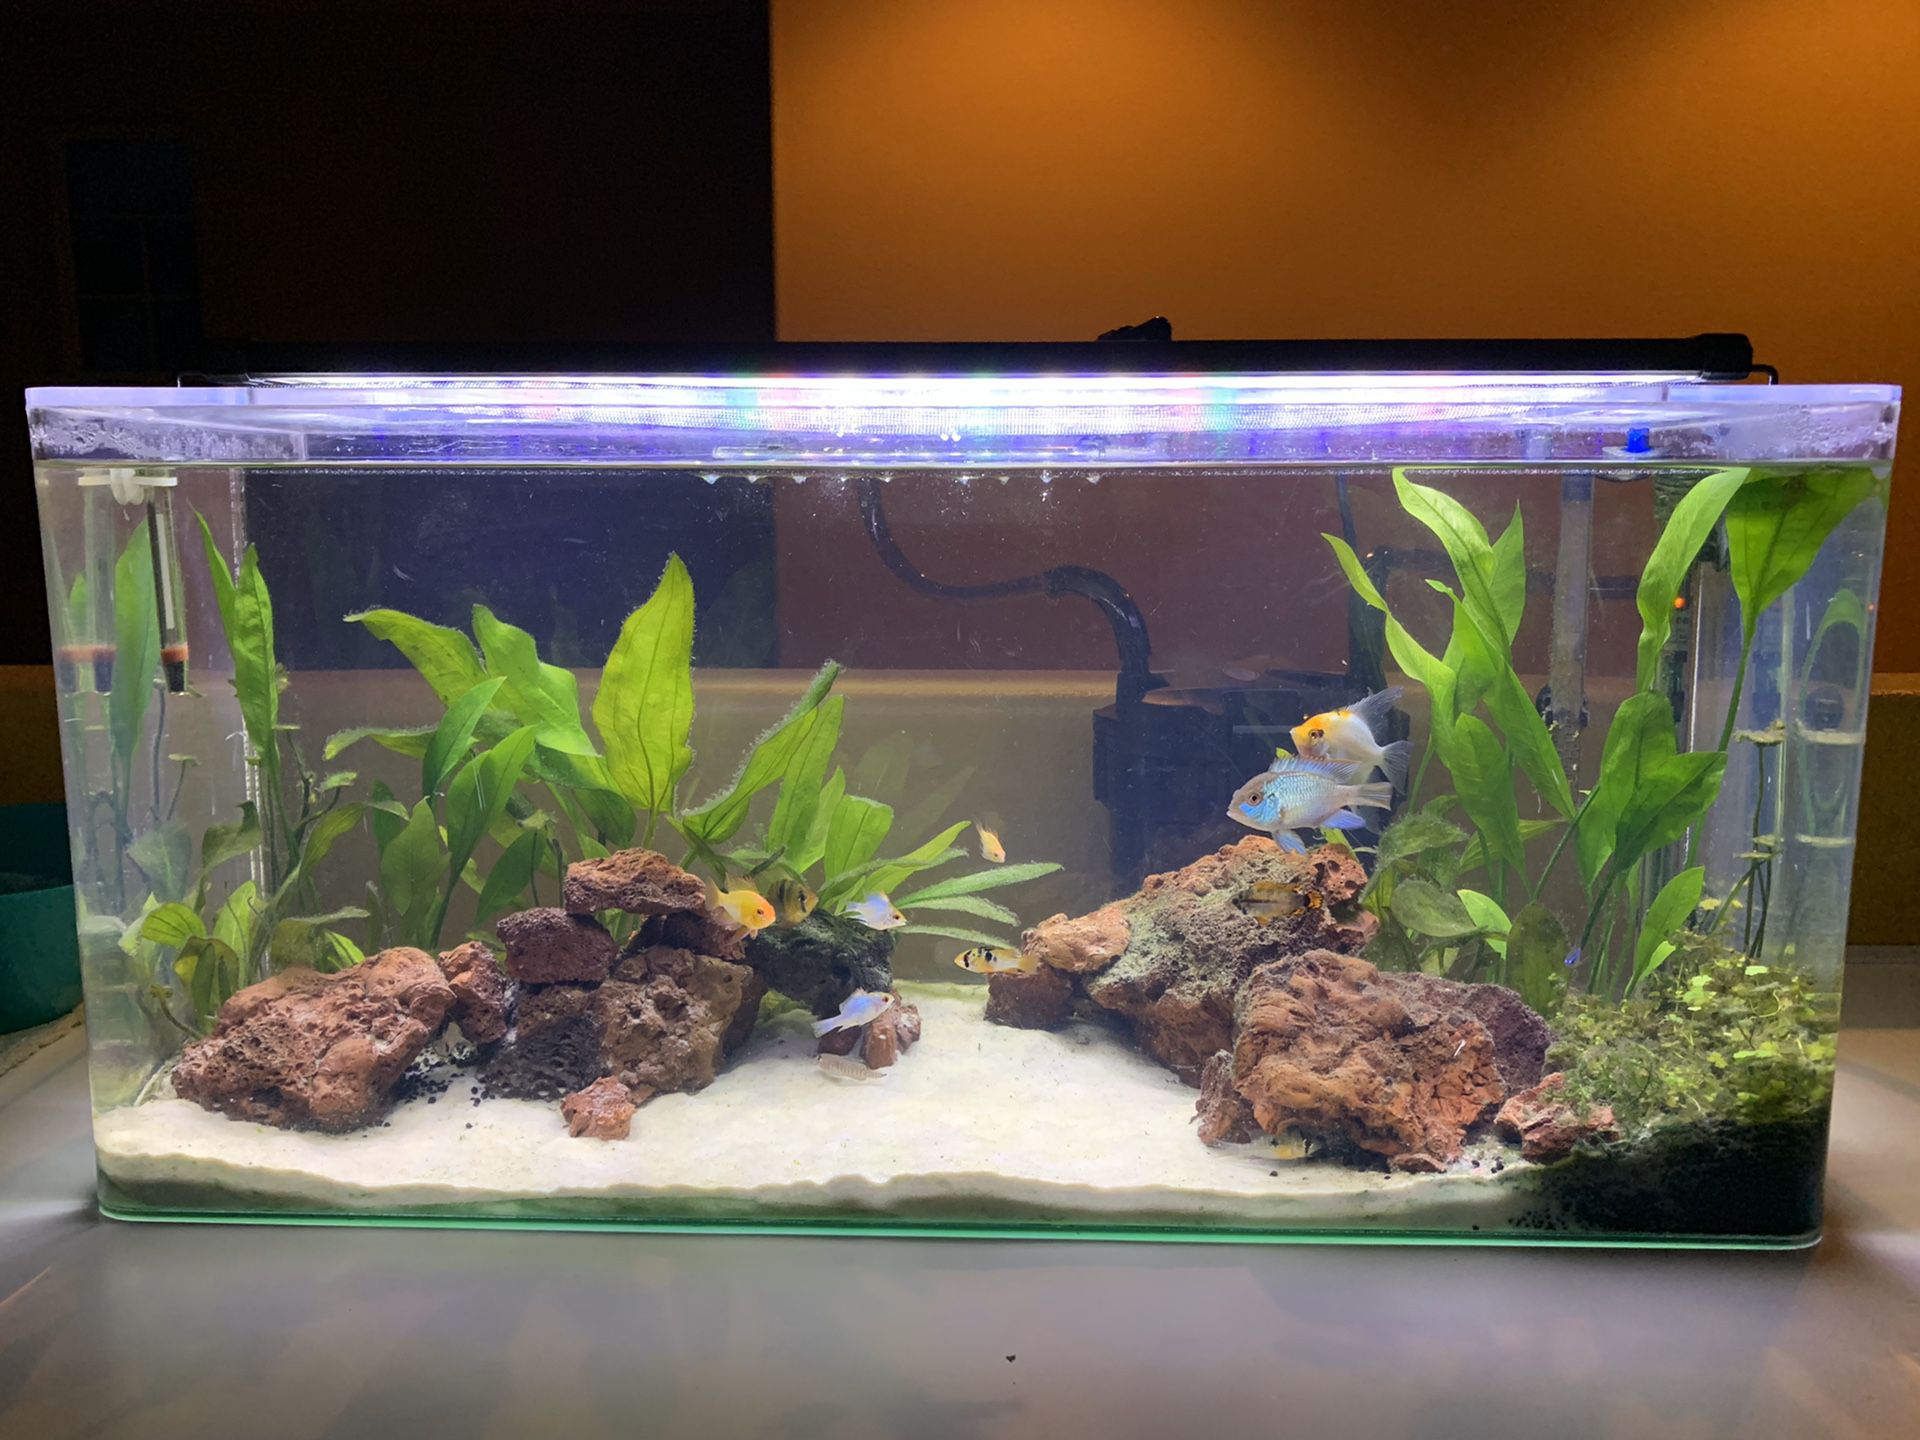 20 gallon acrylic tank aquarium with all equipment included (canister filter/heater/led light)